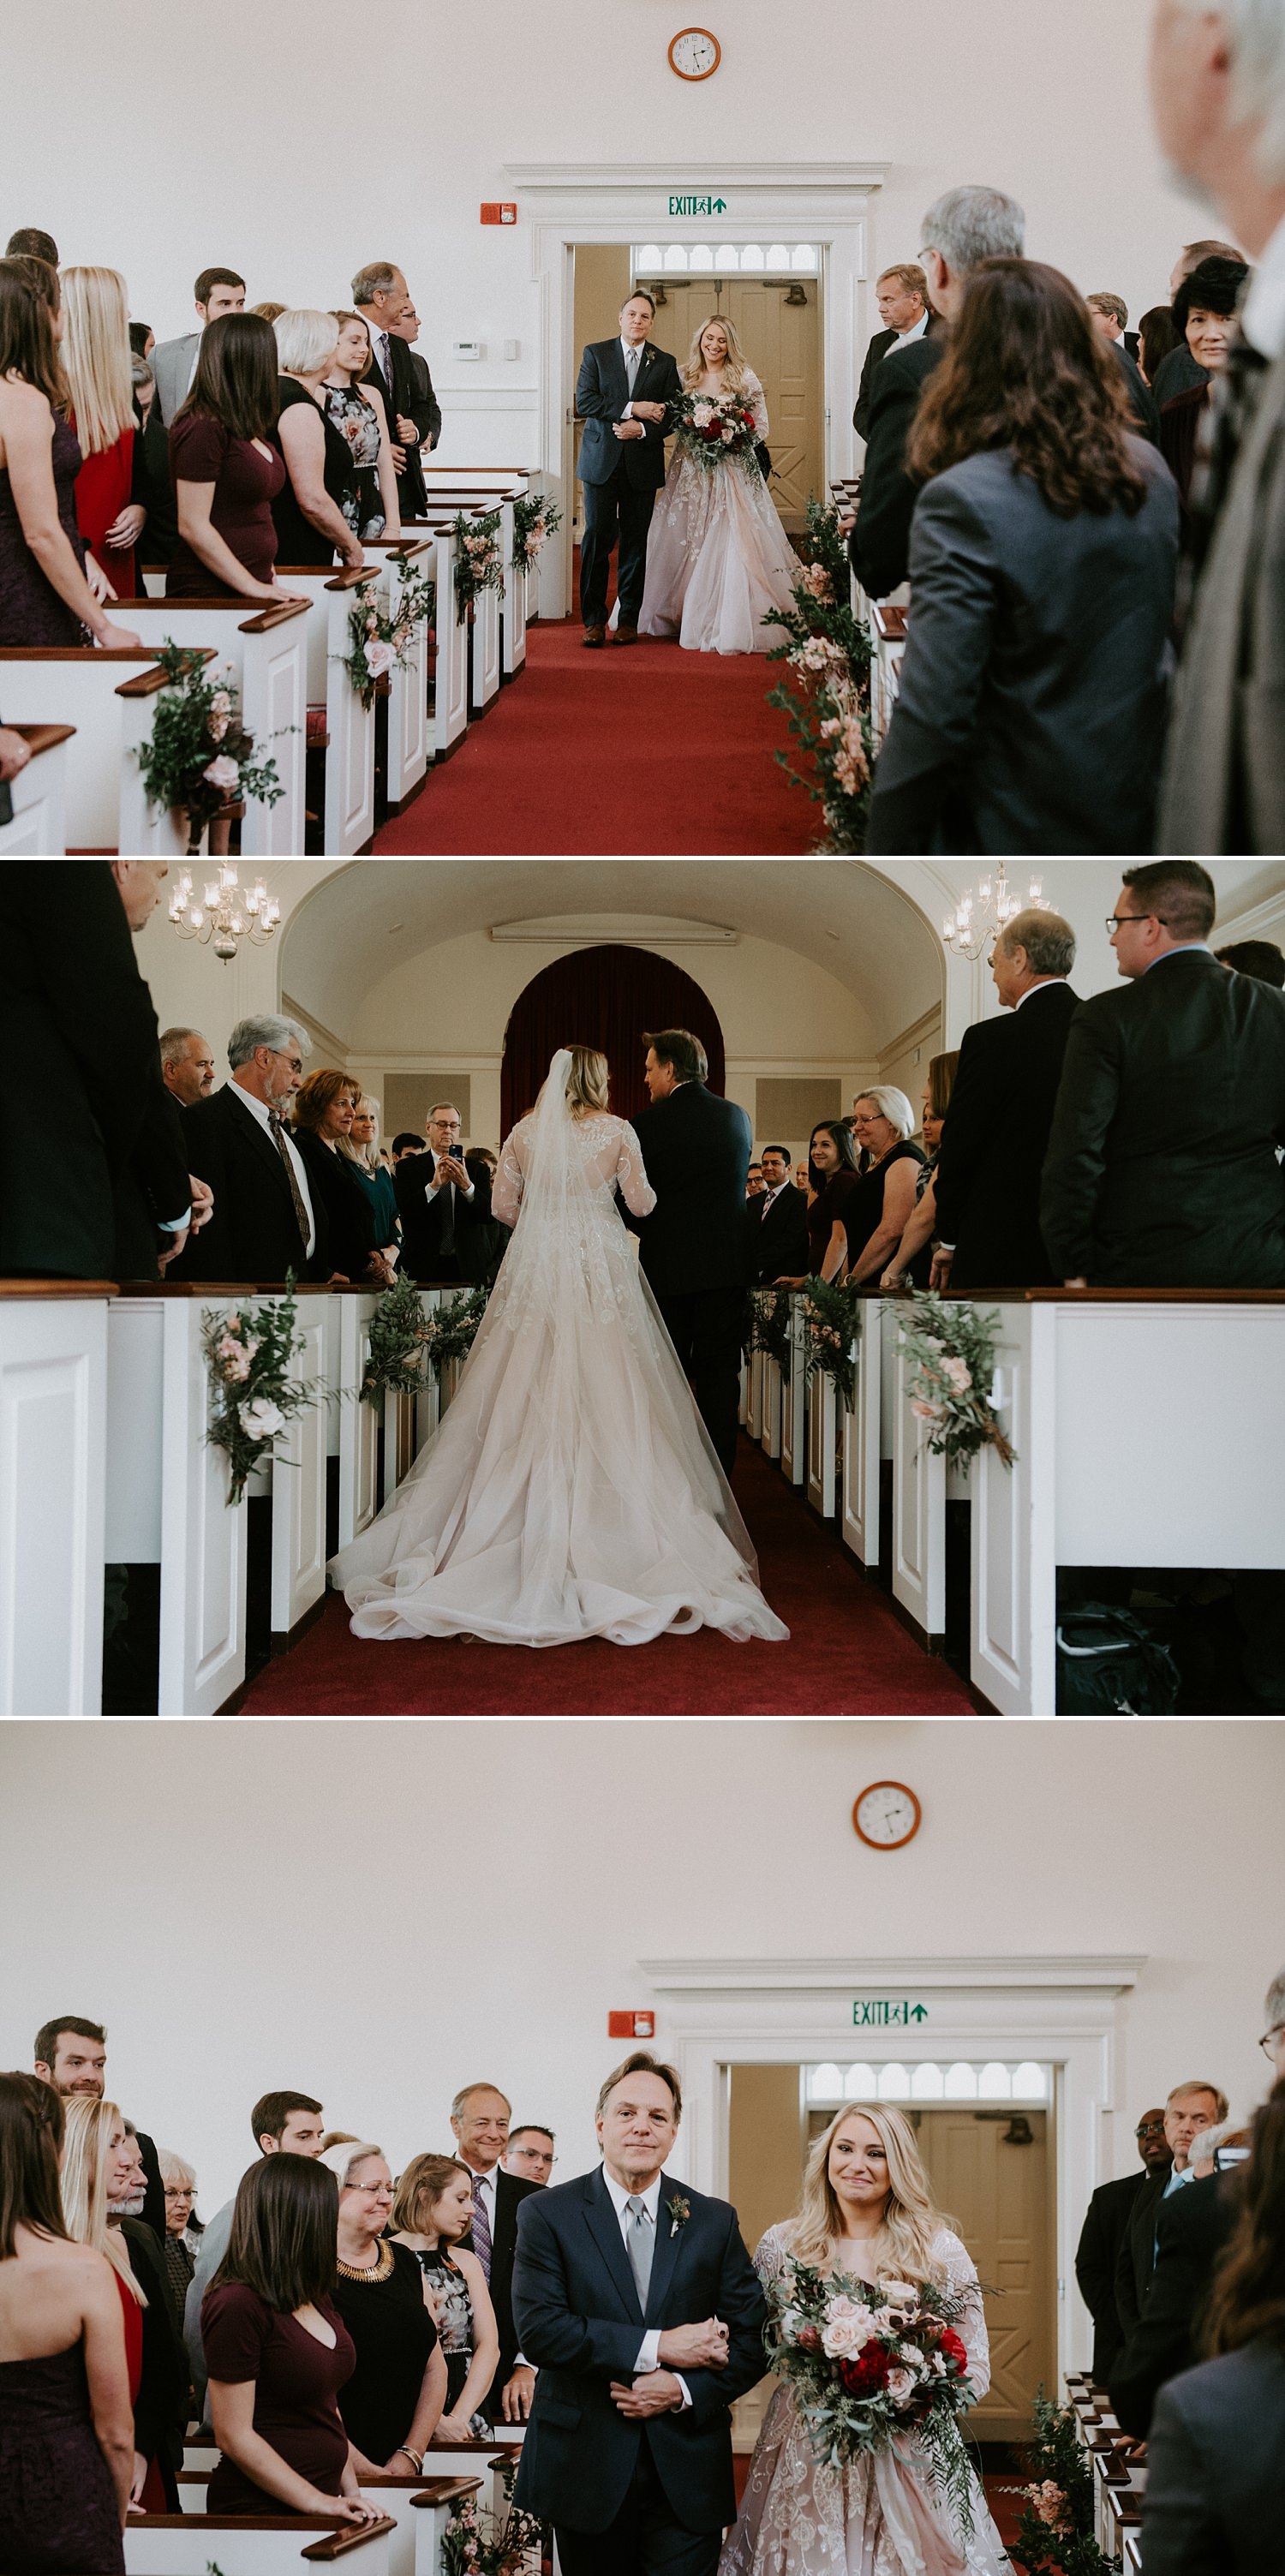 CT Church wedding ceremony in Wethersfield, CT